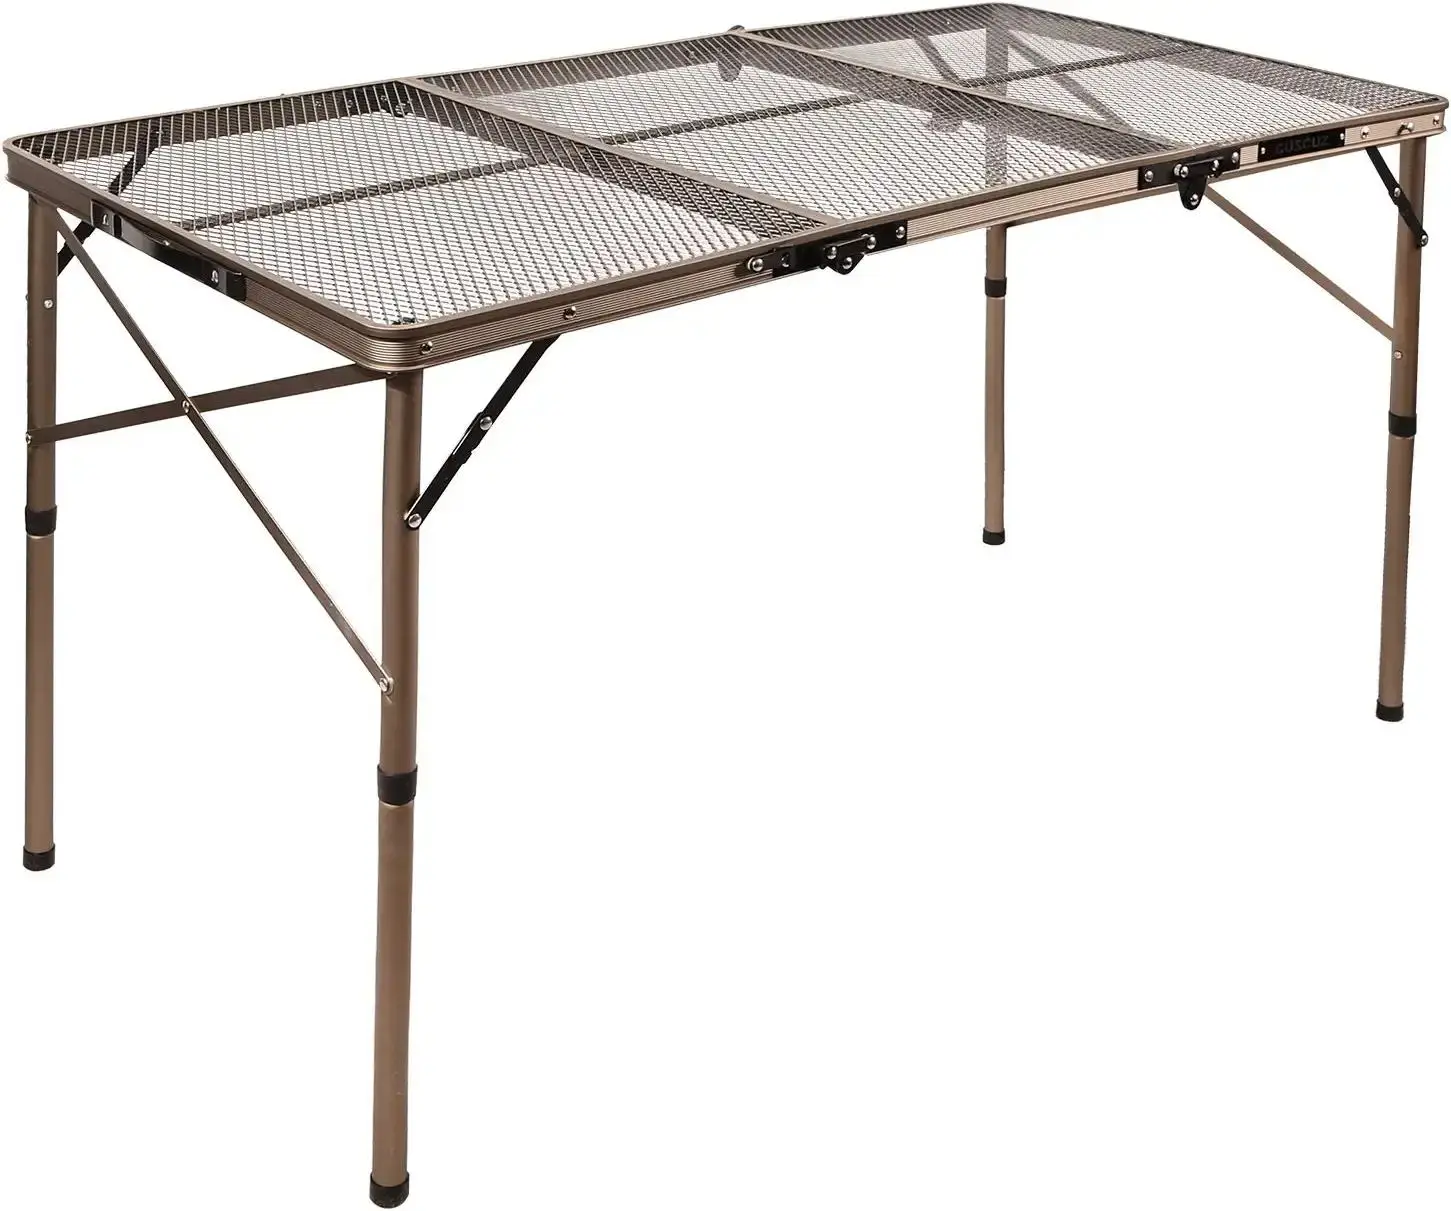 Best Quality Portable Lightweight Hiking Table Cloth Table Top with Aluminum Frame Folding Camping Picnic Table